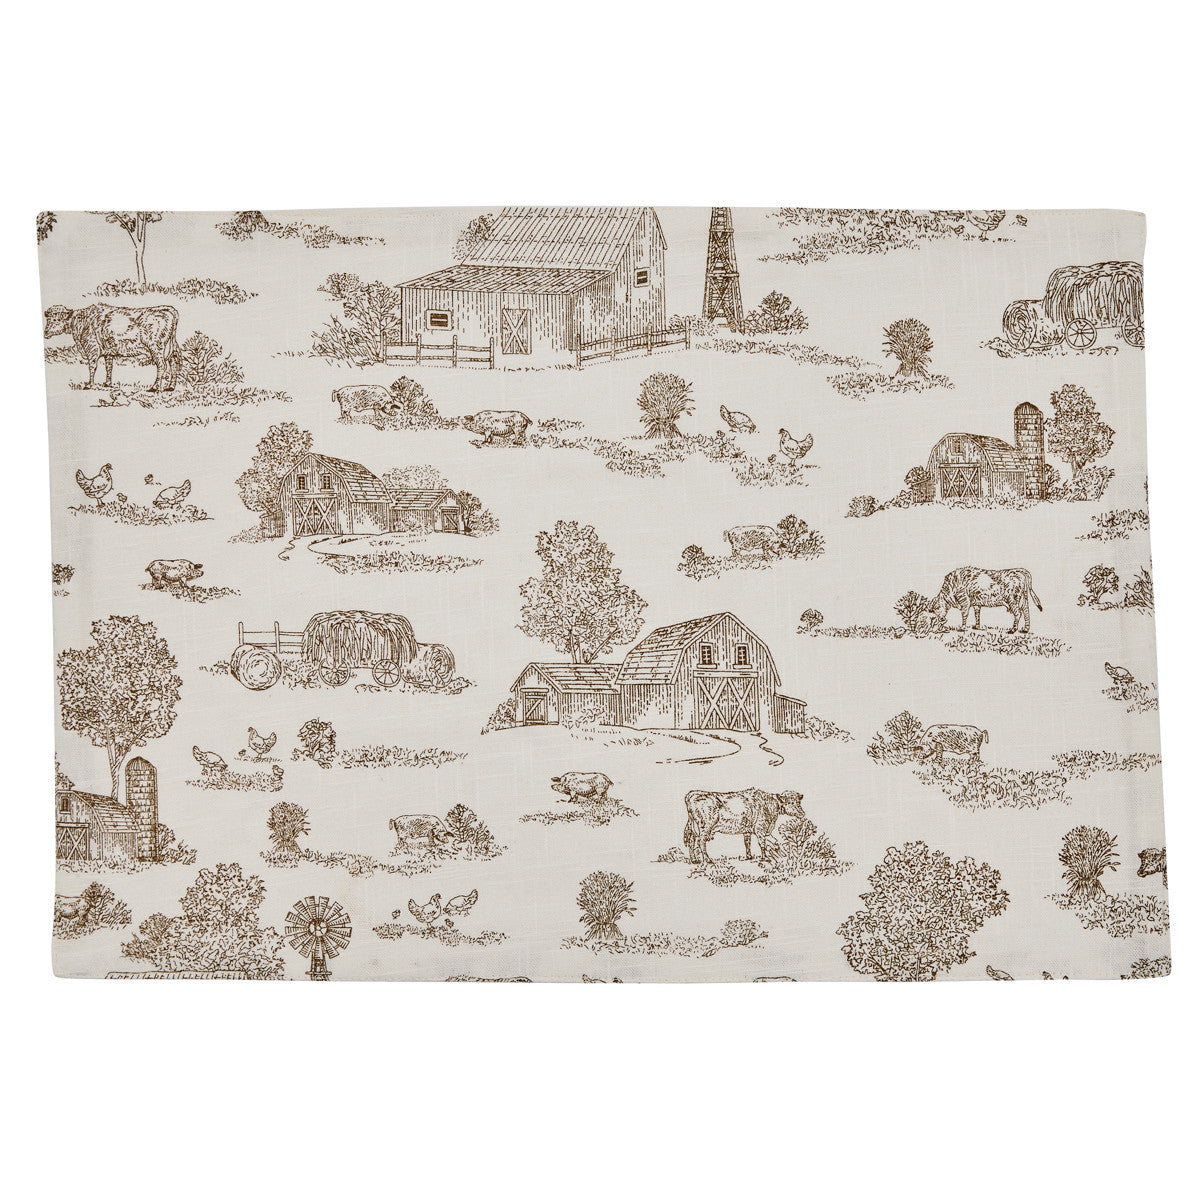 Down On The Farm Toile Placemats - Set of 12 Park Designs